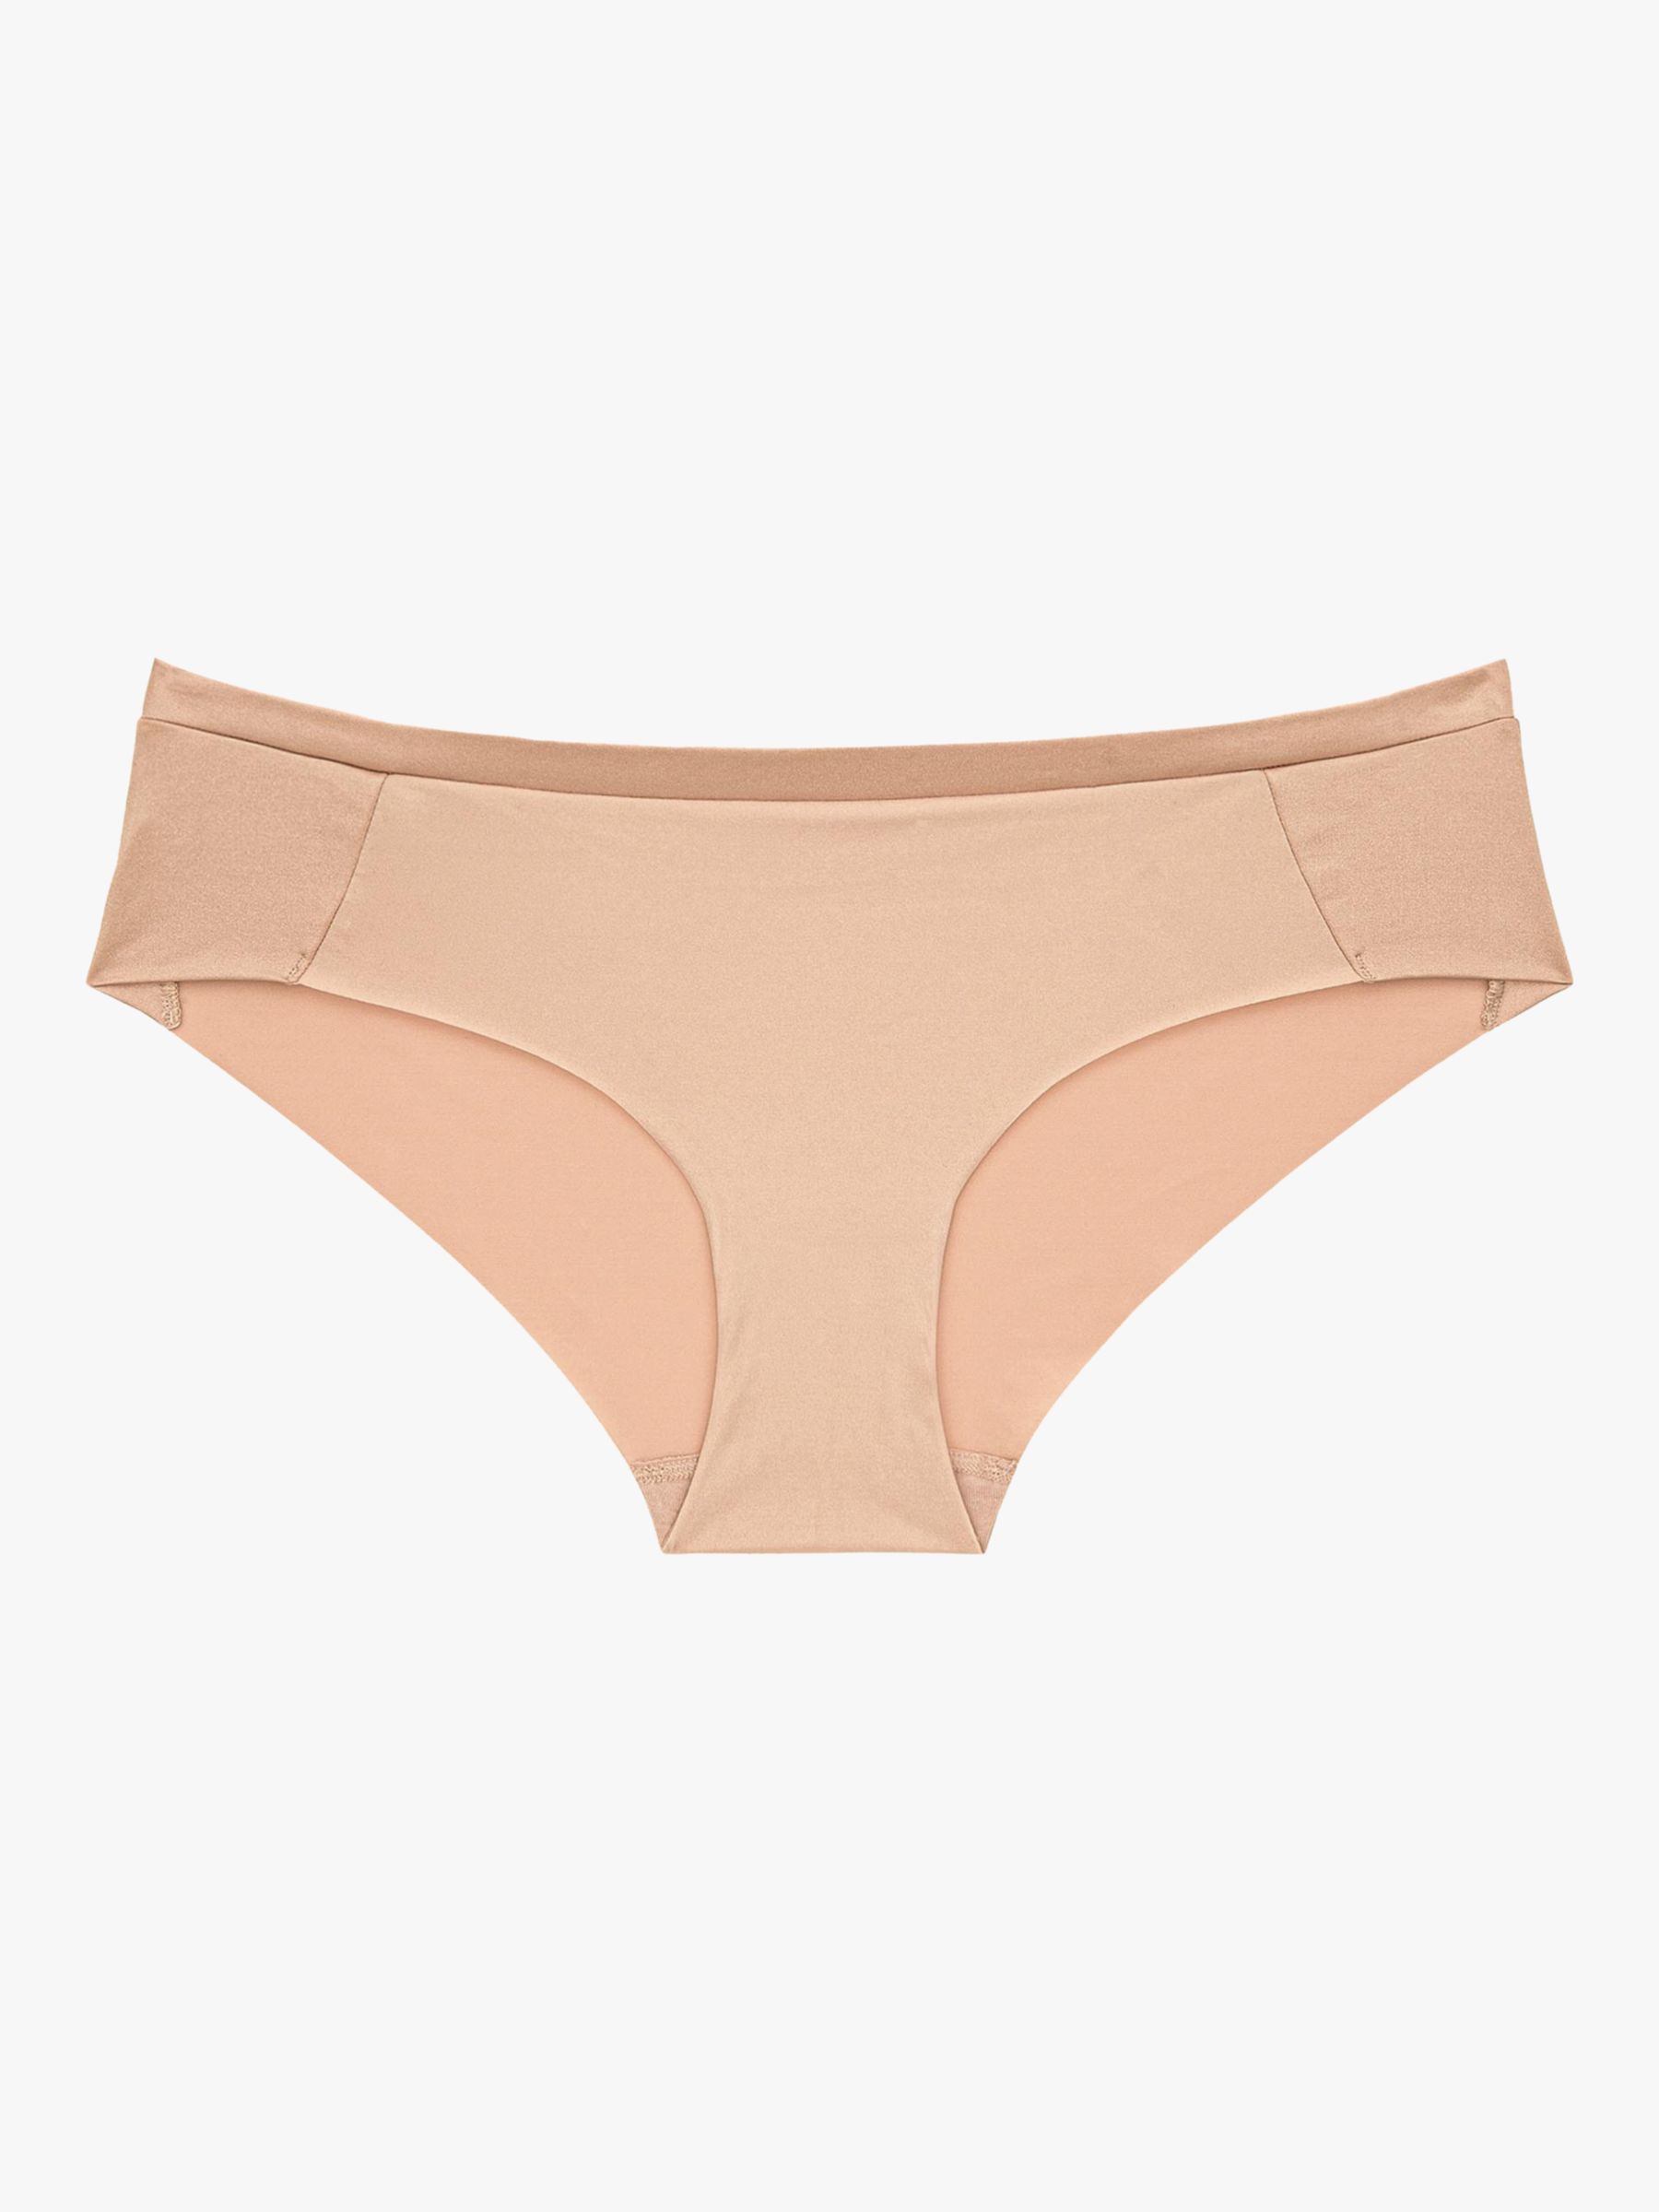 Triumph Everyday Body Make-Up Soft Touch Hipster Briefs, Neutral Beige at  John Lewis & Partners